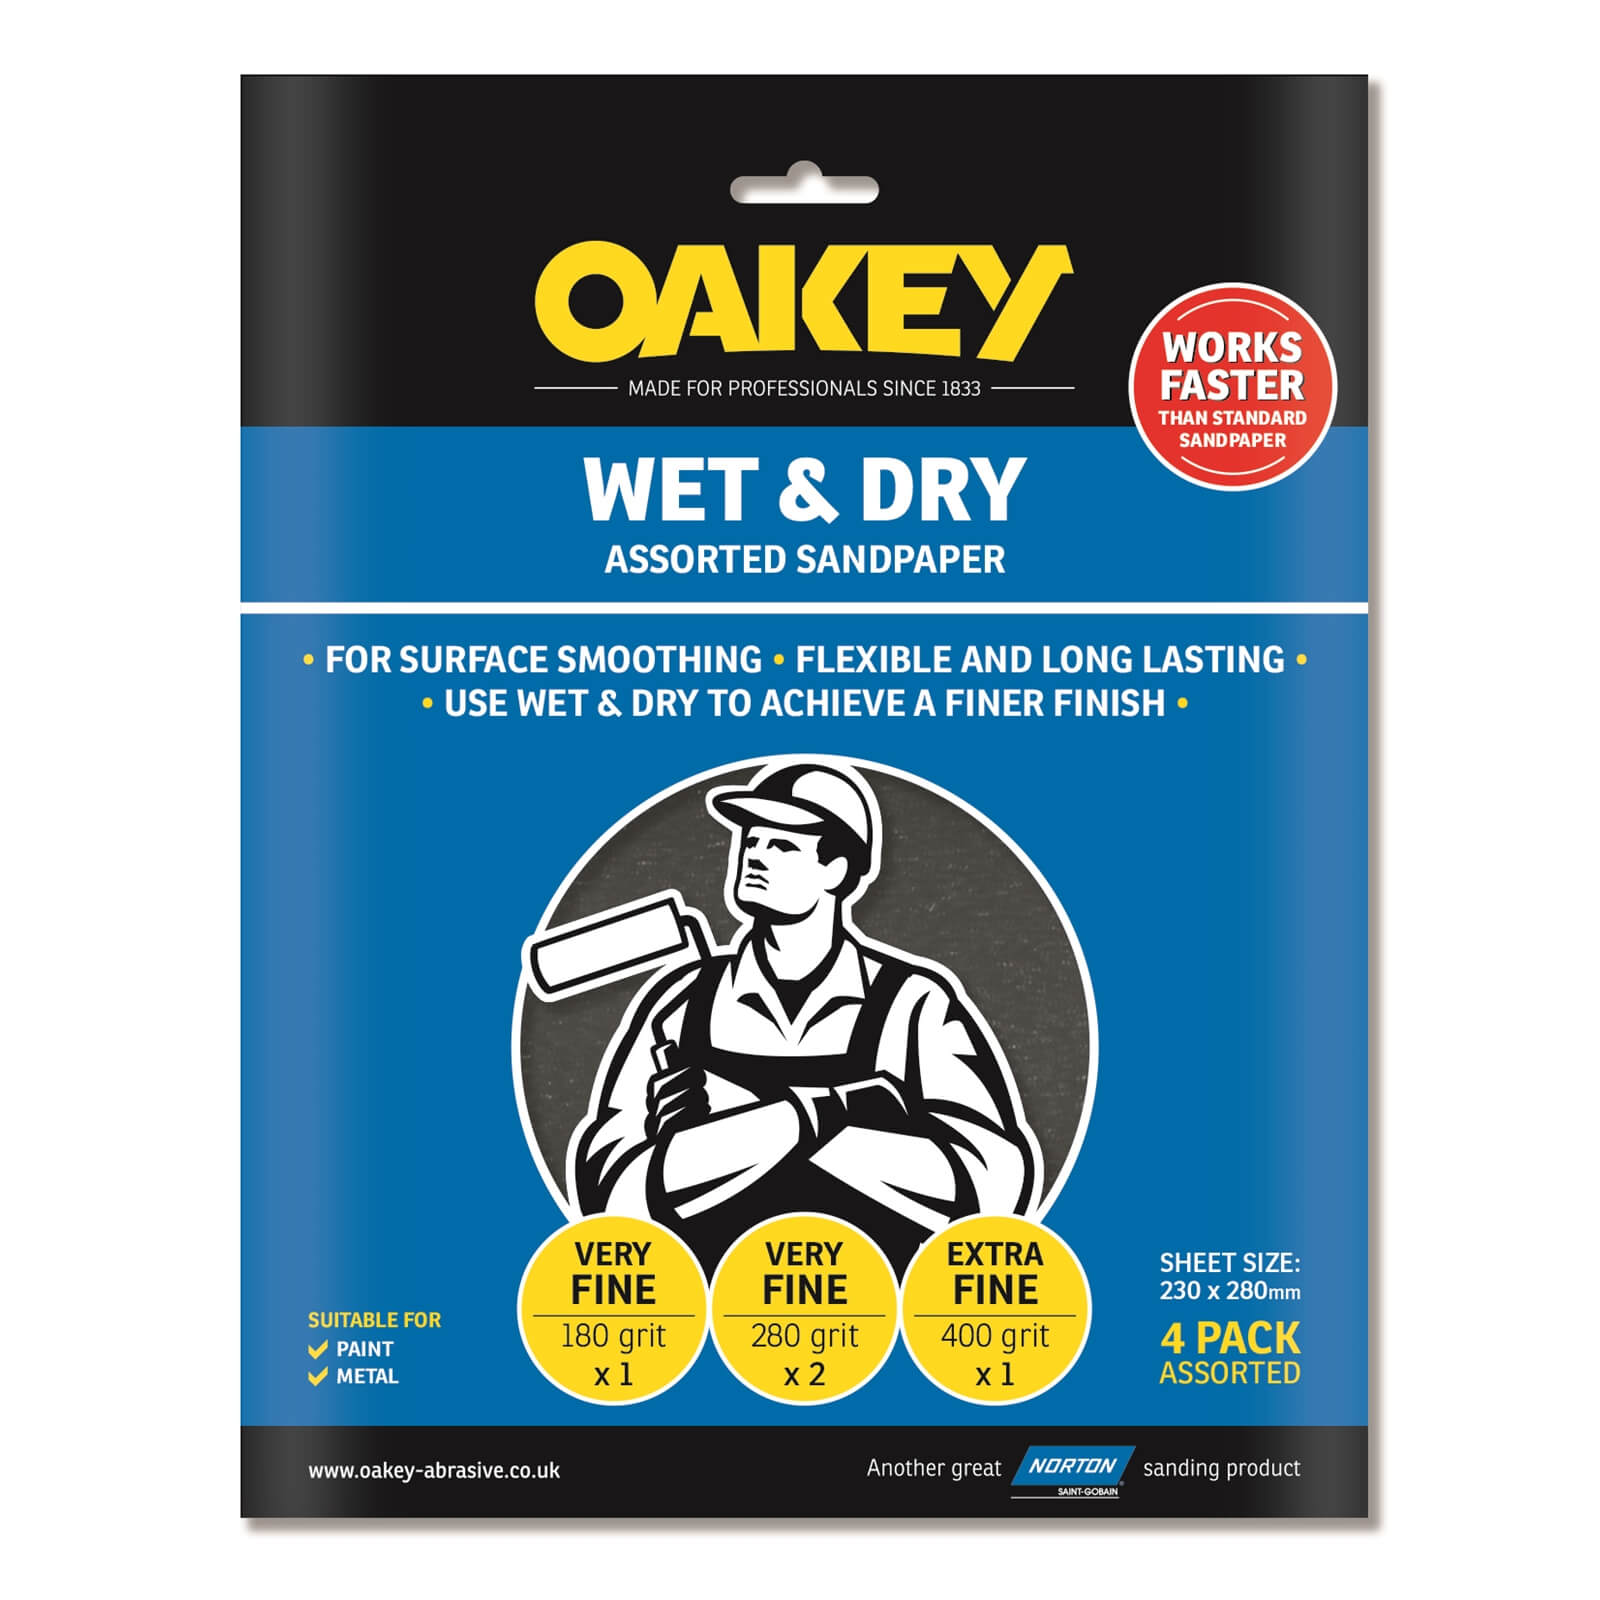 Oakey Wet & Dry Assorted Sandpaper - 4 Sheets